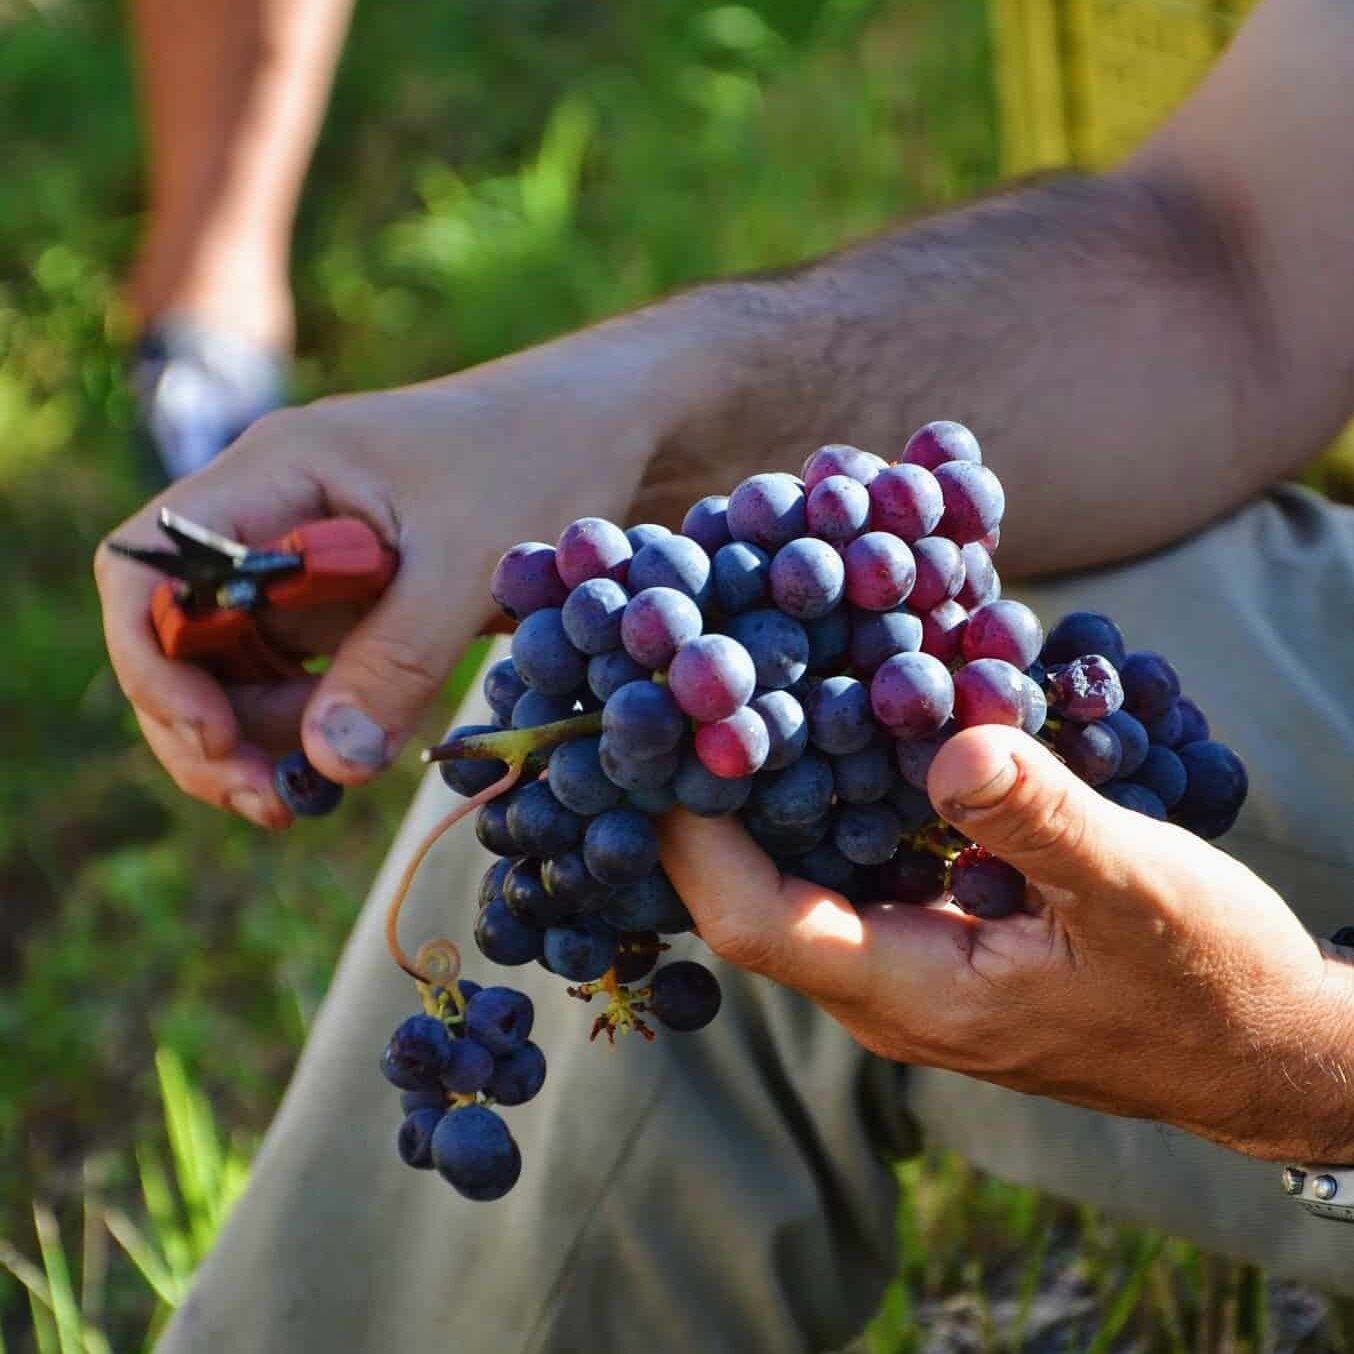 Hand full of grapes freshly cut from the vine